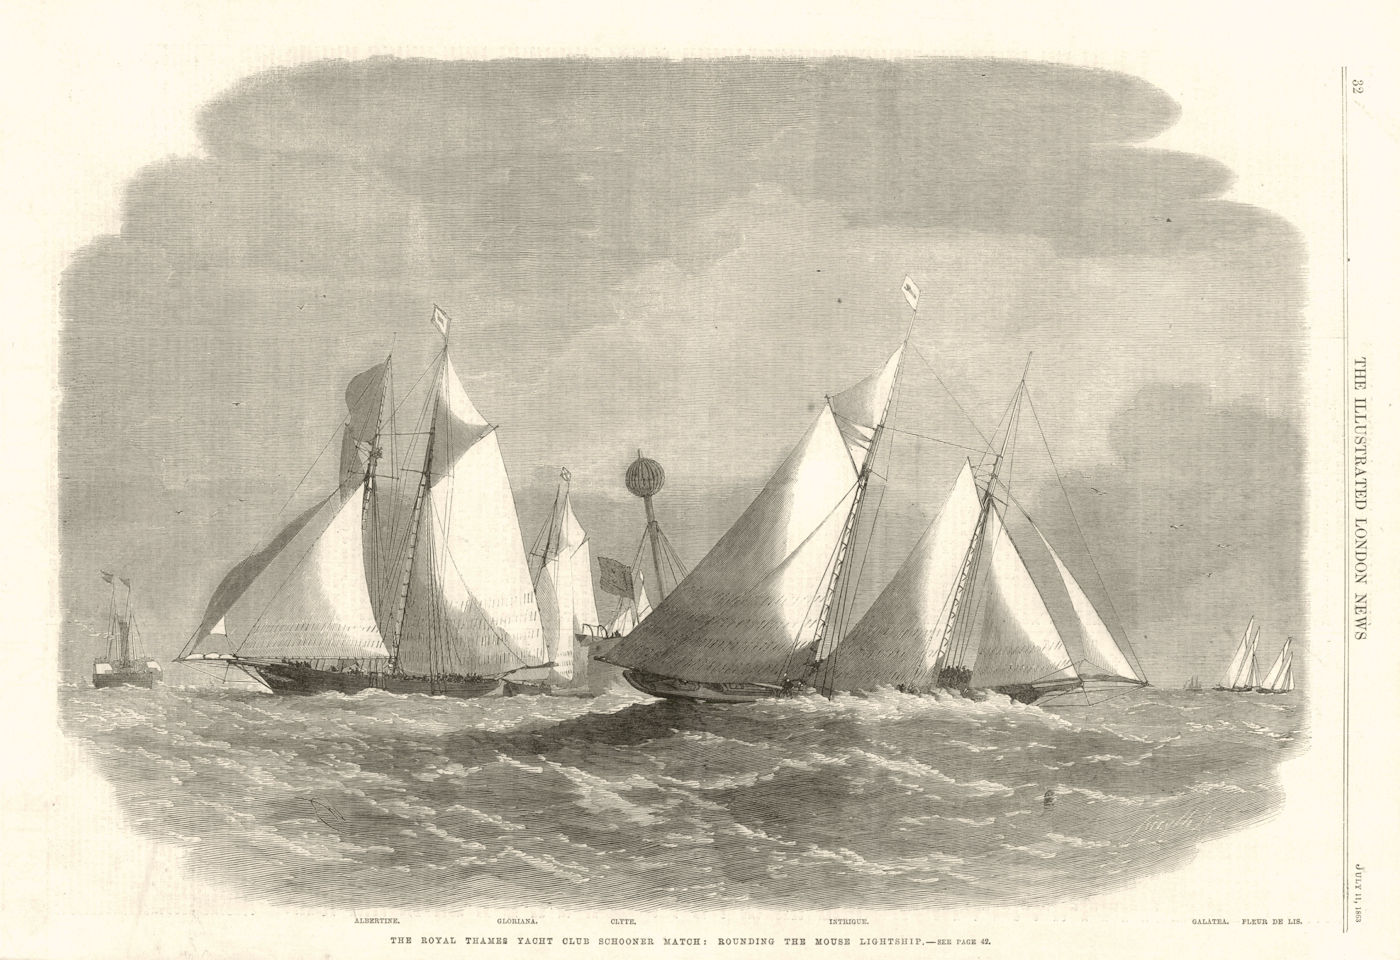 Associate Product Royal Thames Yacht club schooner match: Rounding the Mouse lightship 1863